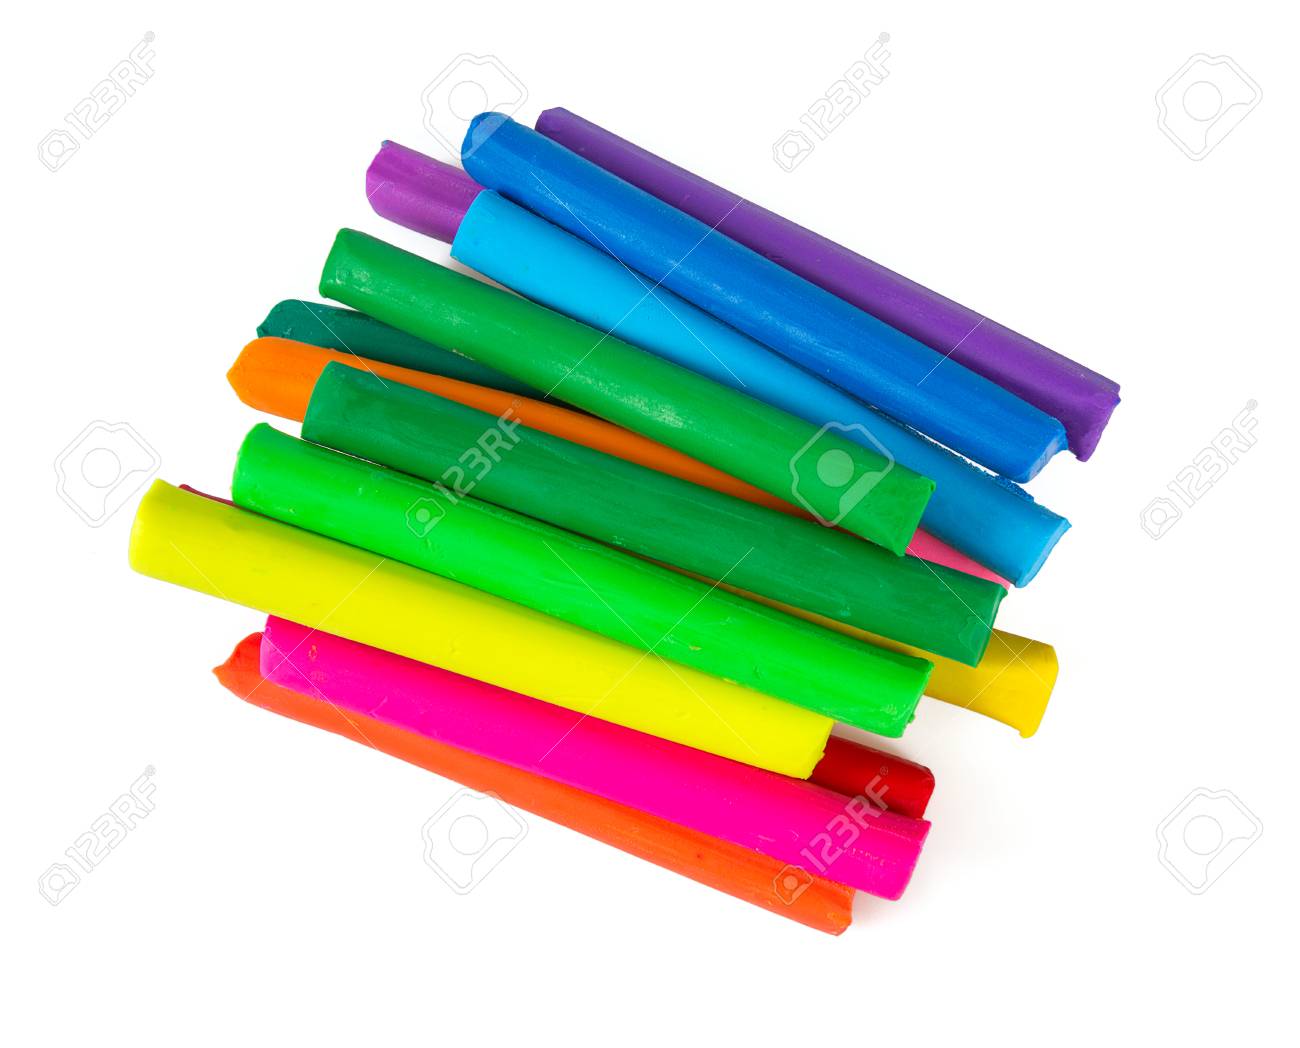 Colorful Playdough On White Background Stock Photo Picture And